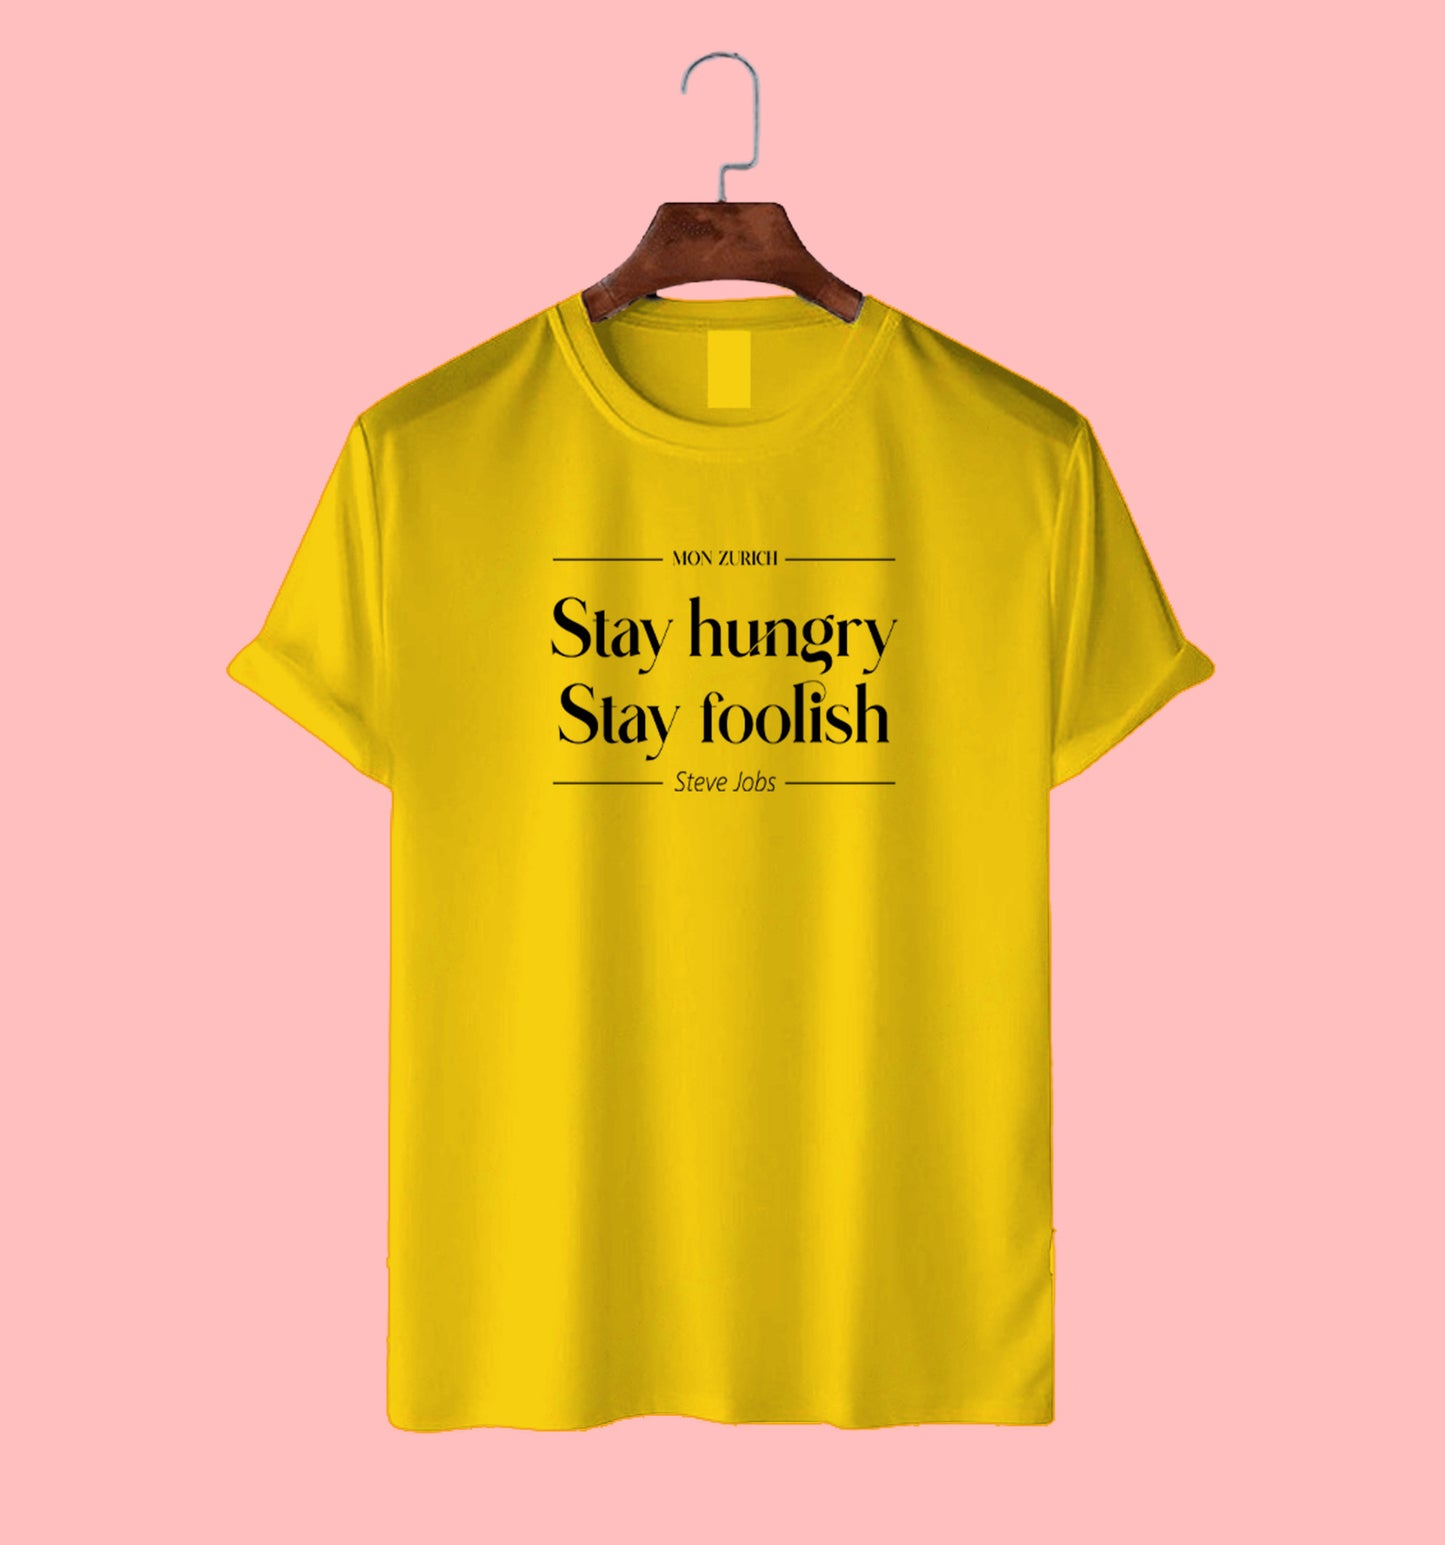 Stay Hungry T-Shirt In Light - Mon Zurich Originals